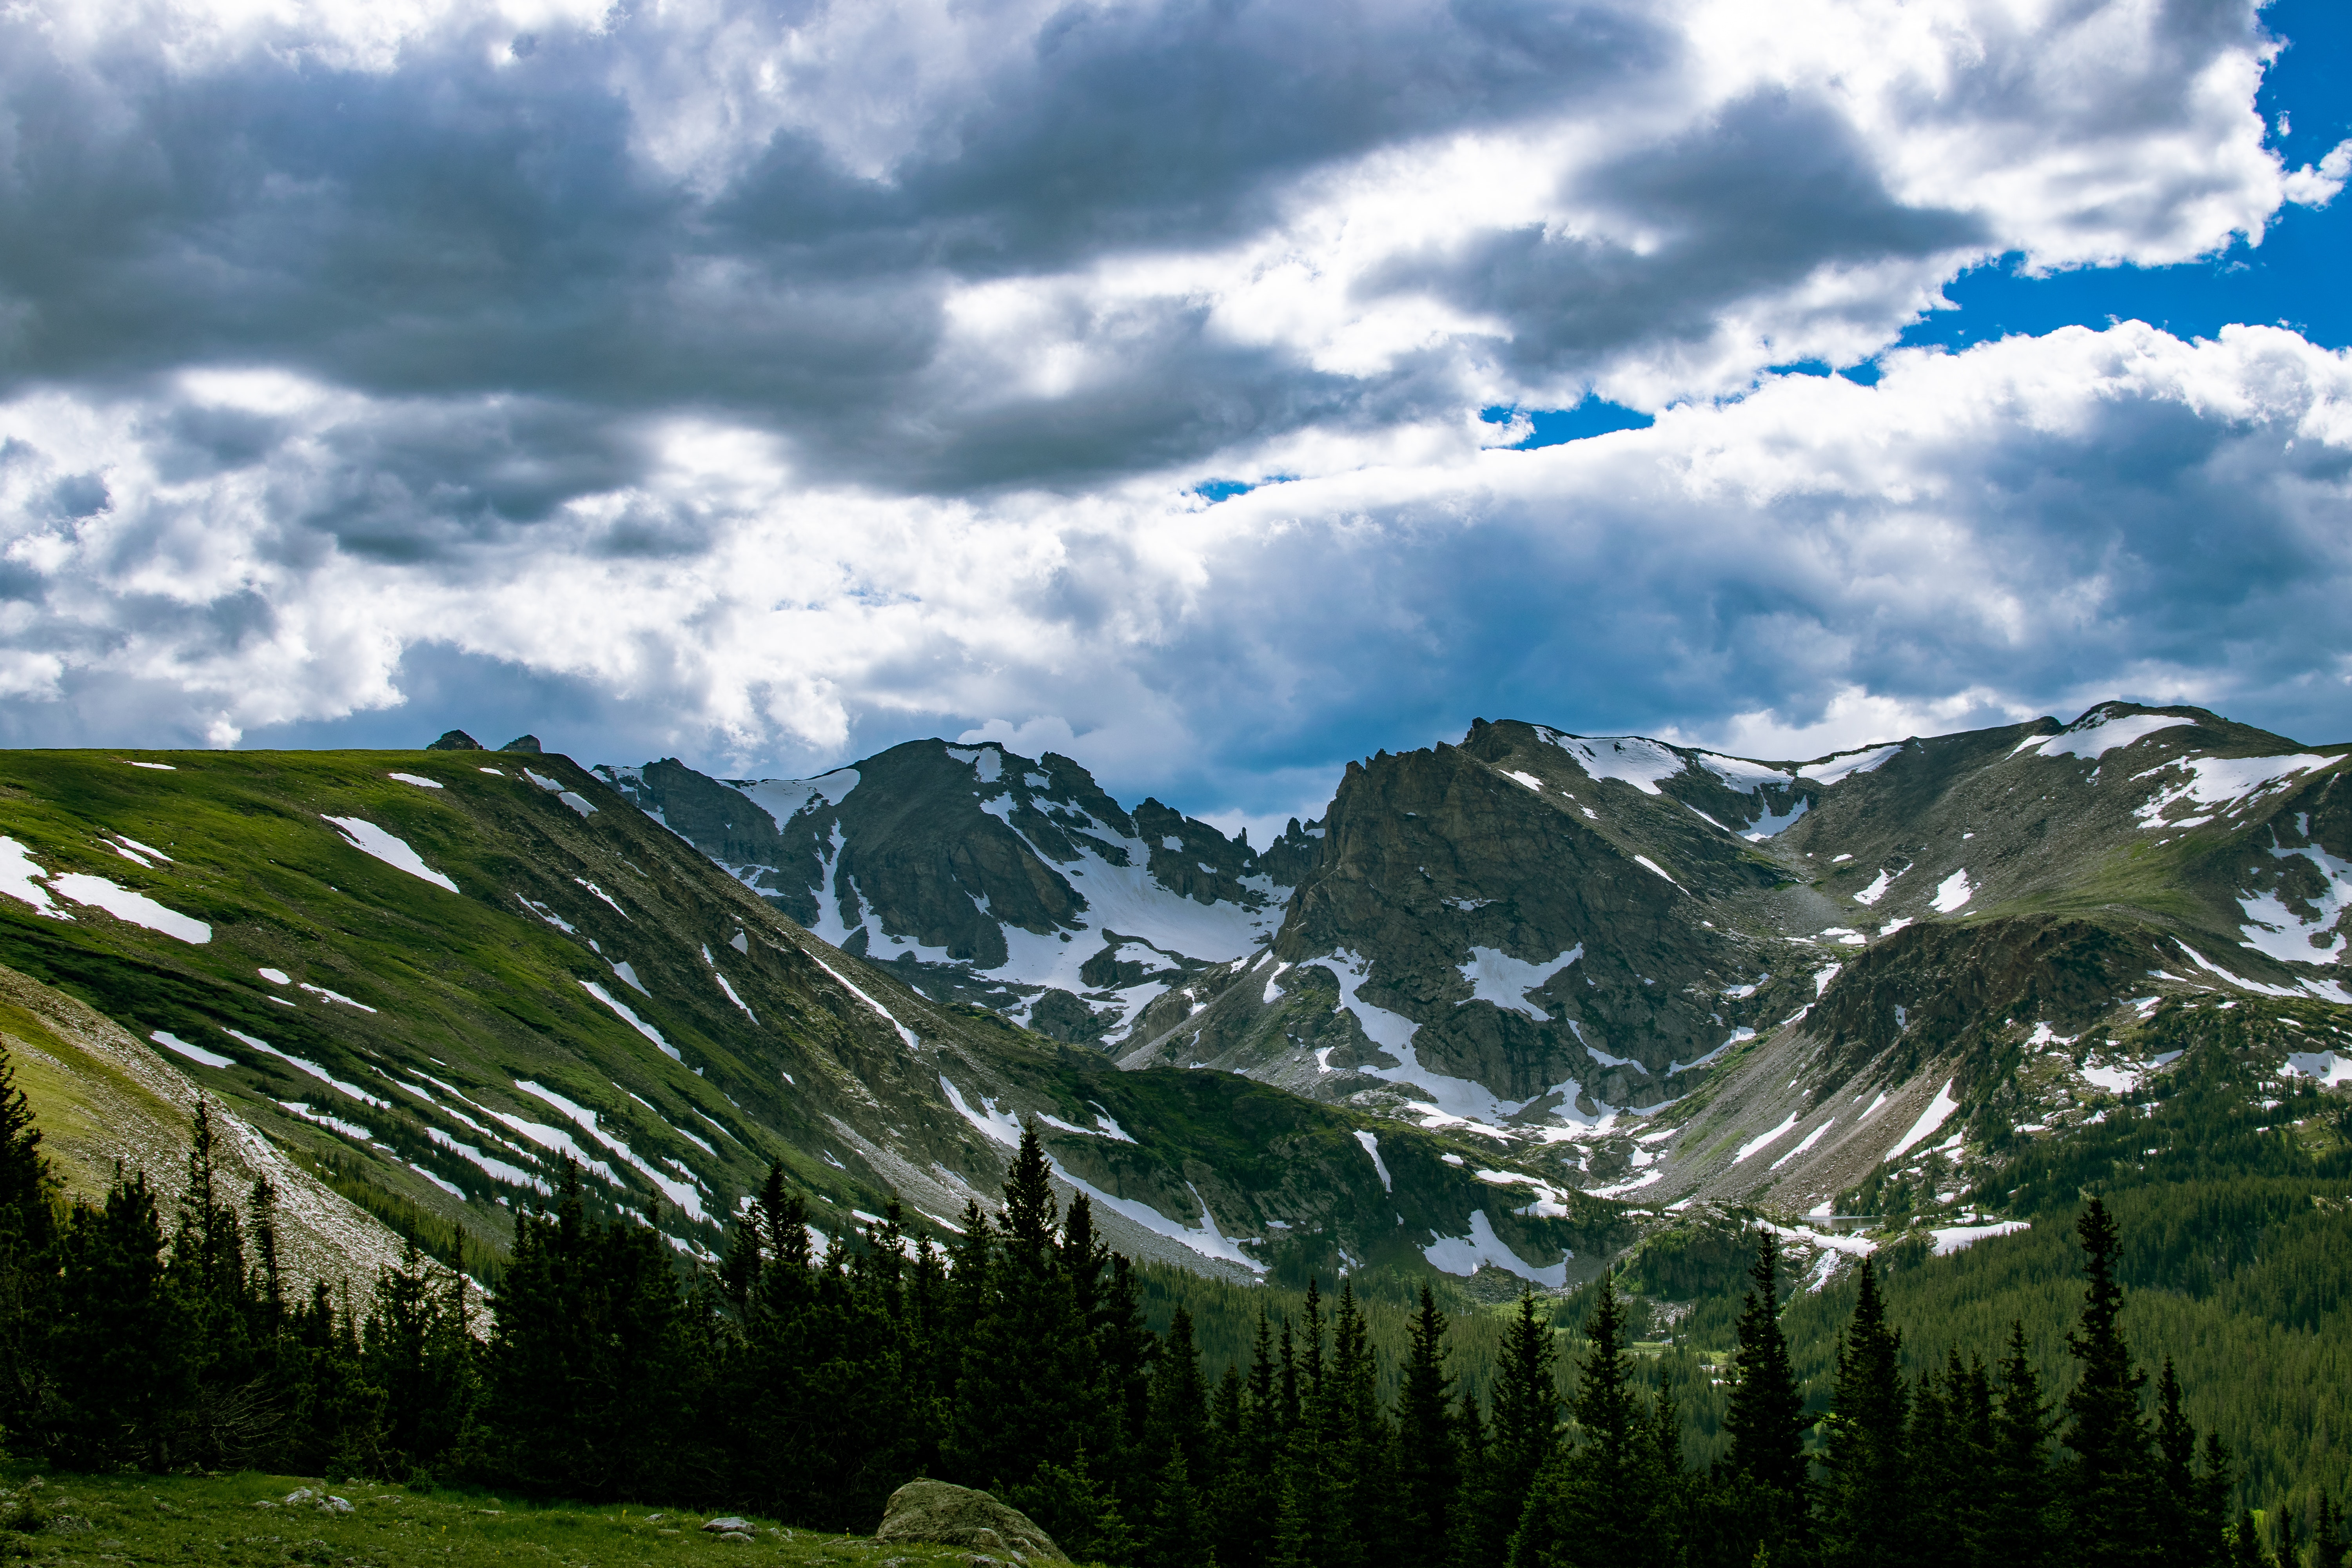 General 6000x4000 clouds daylight landscape nature forest mountain top mountain pass trees rocks sky mountains